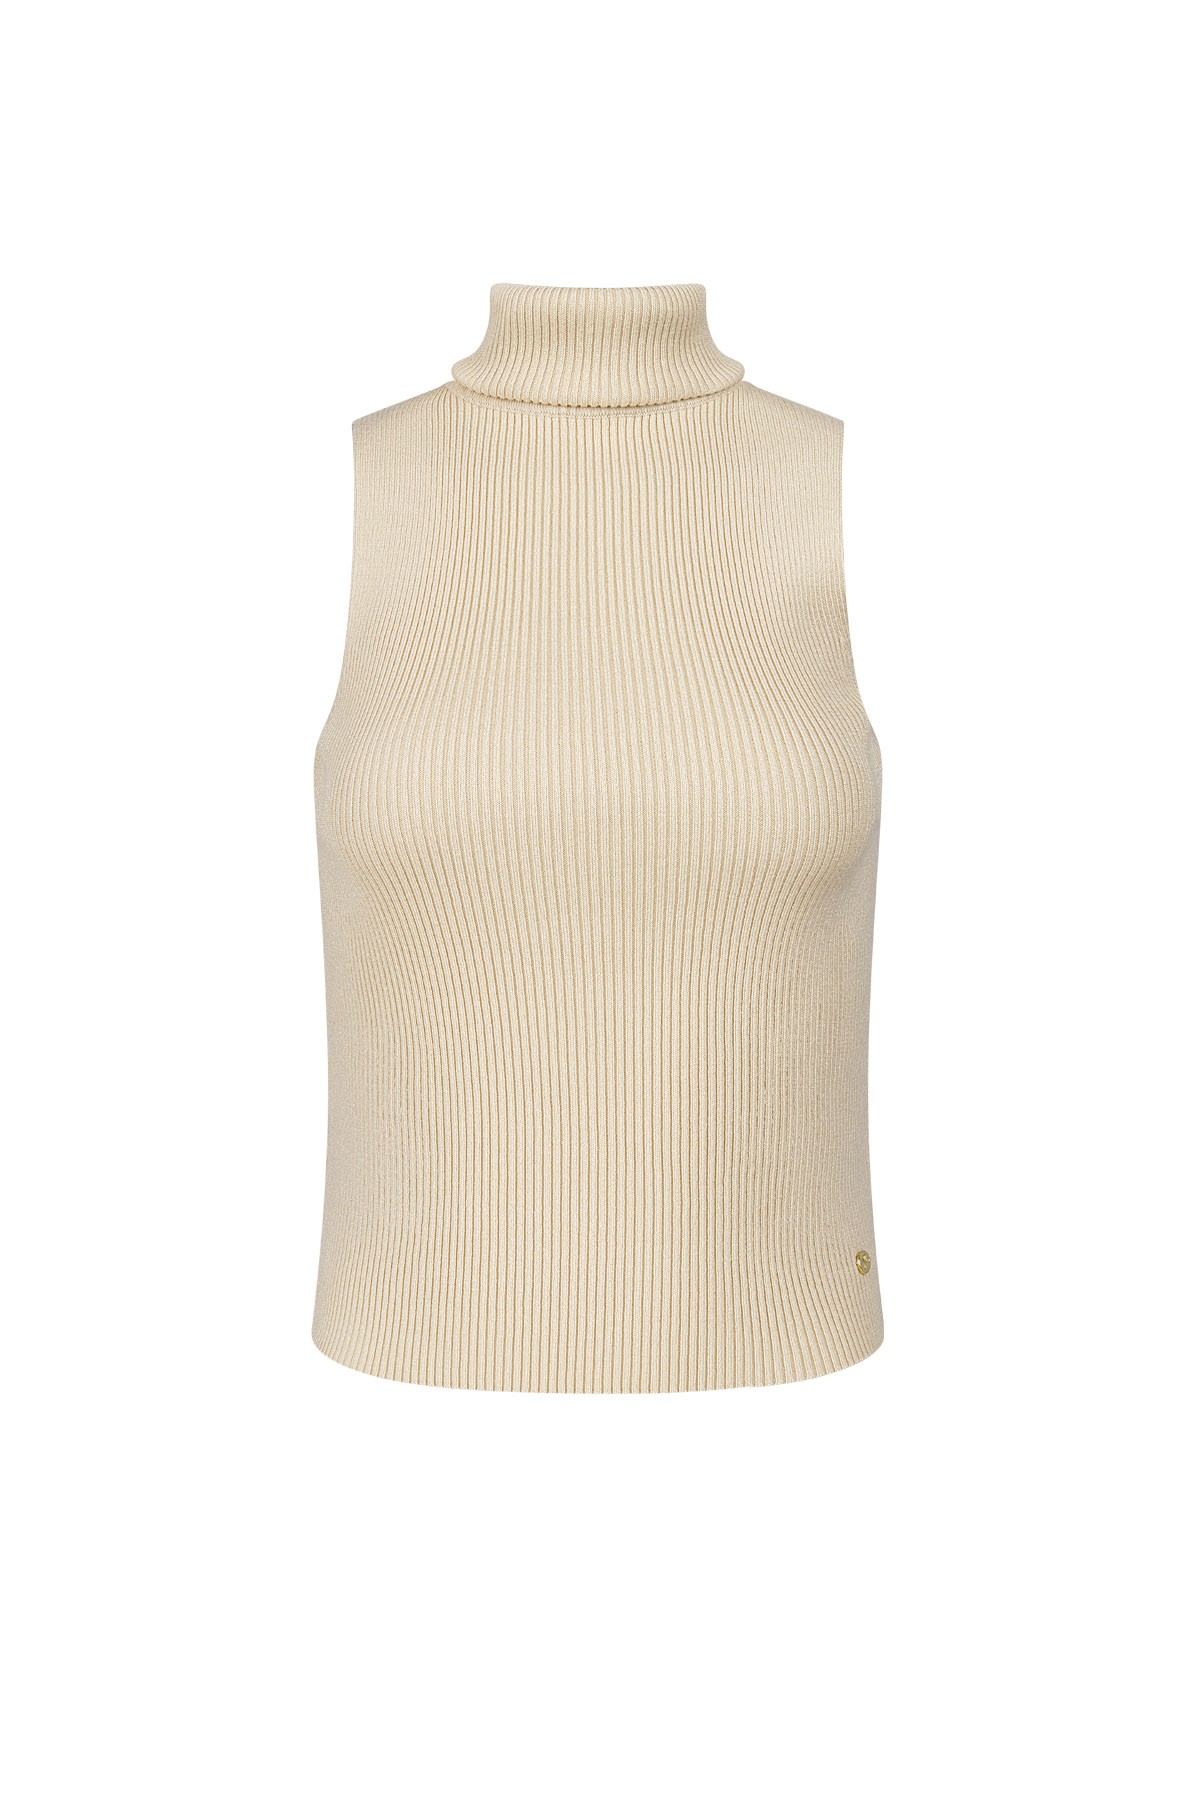 Sleeveless top with high turtleneck large/extra large – beige